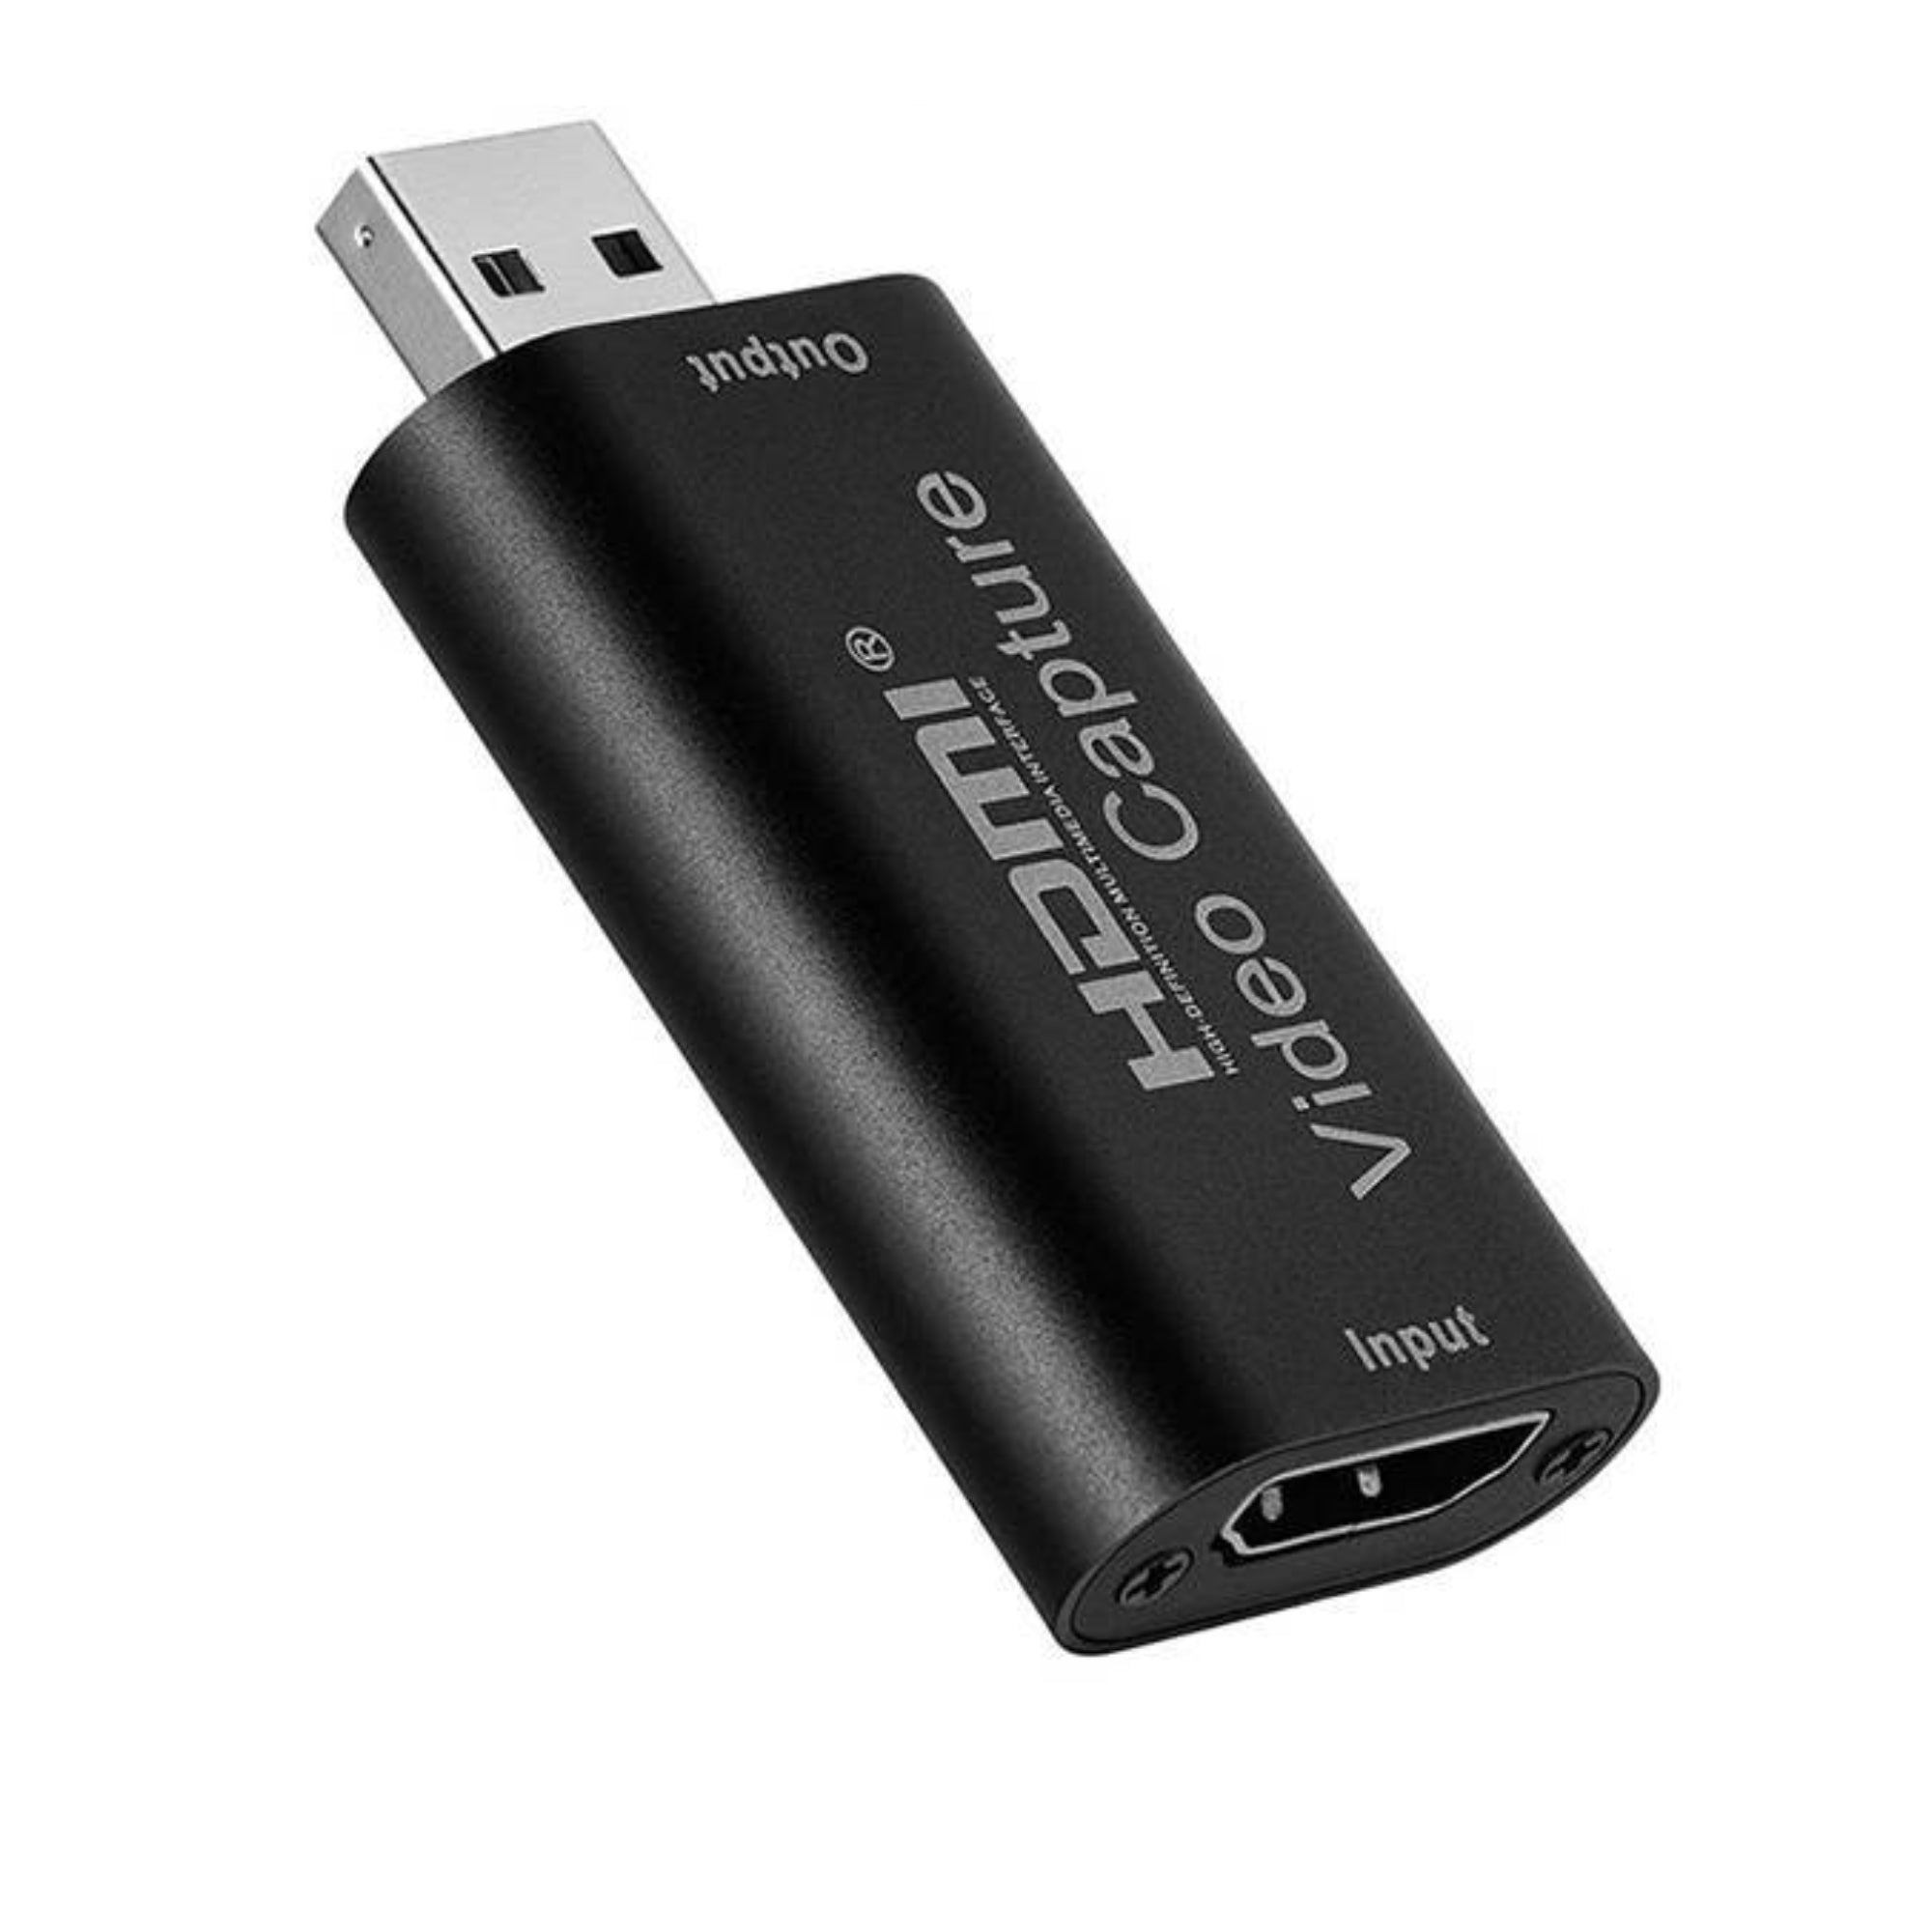 kant Lim ydre HDMI to USB Video Capture Device